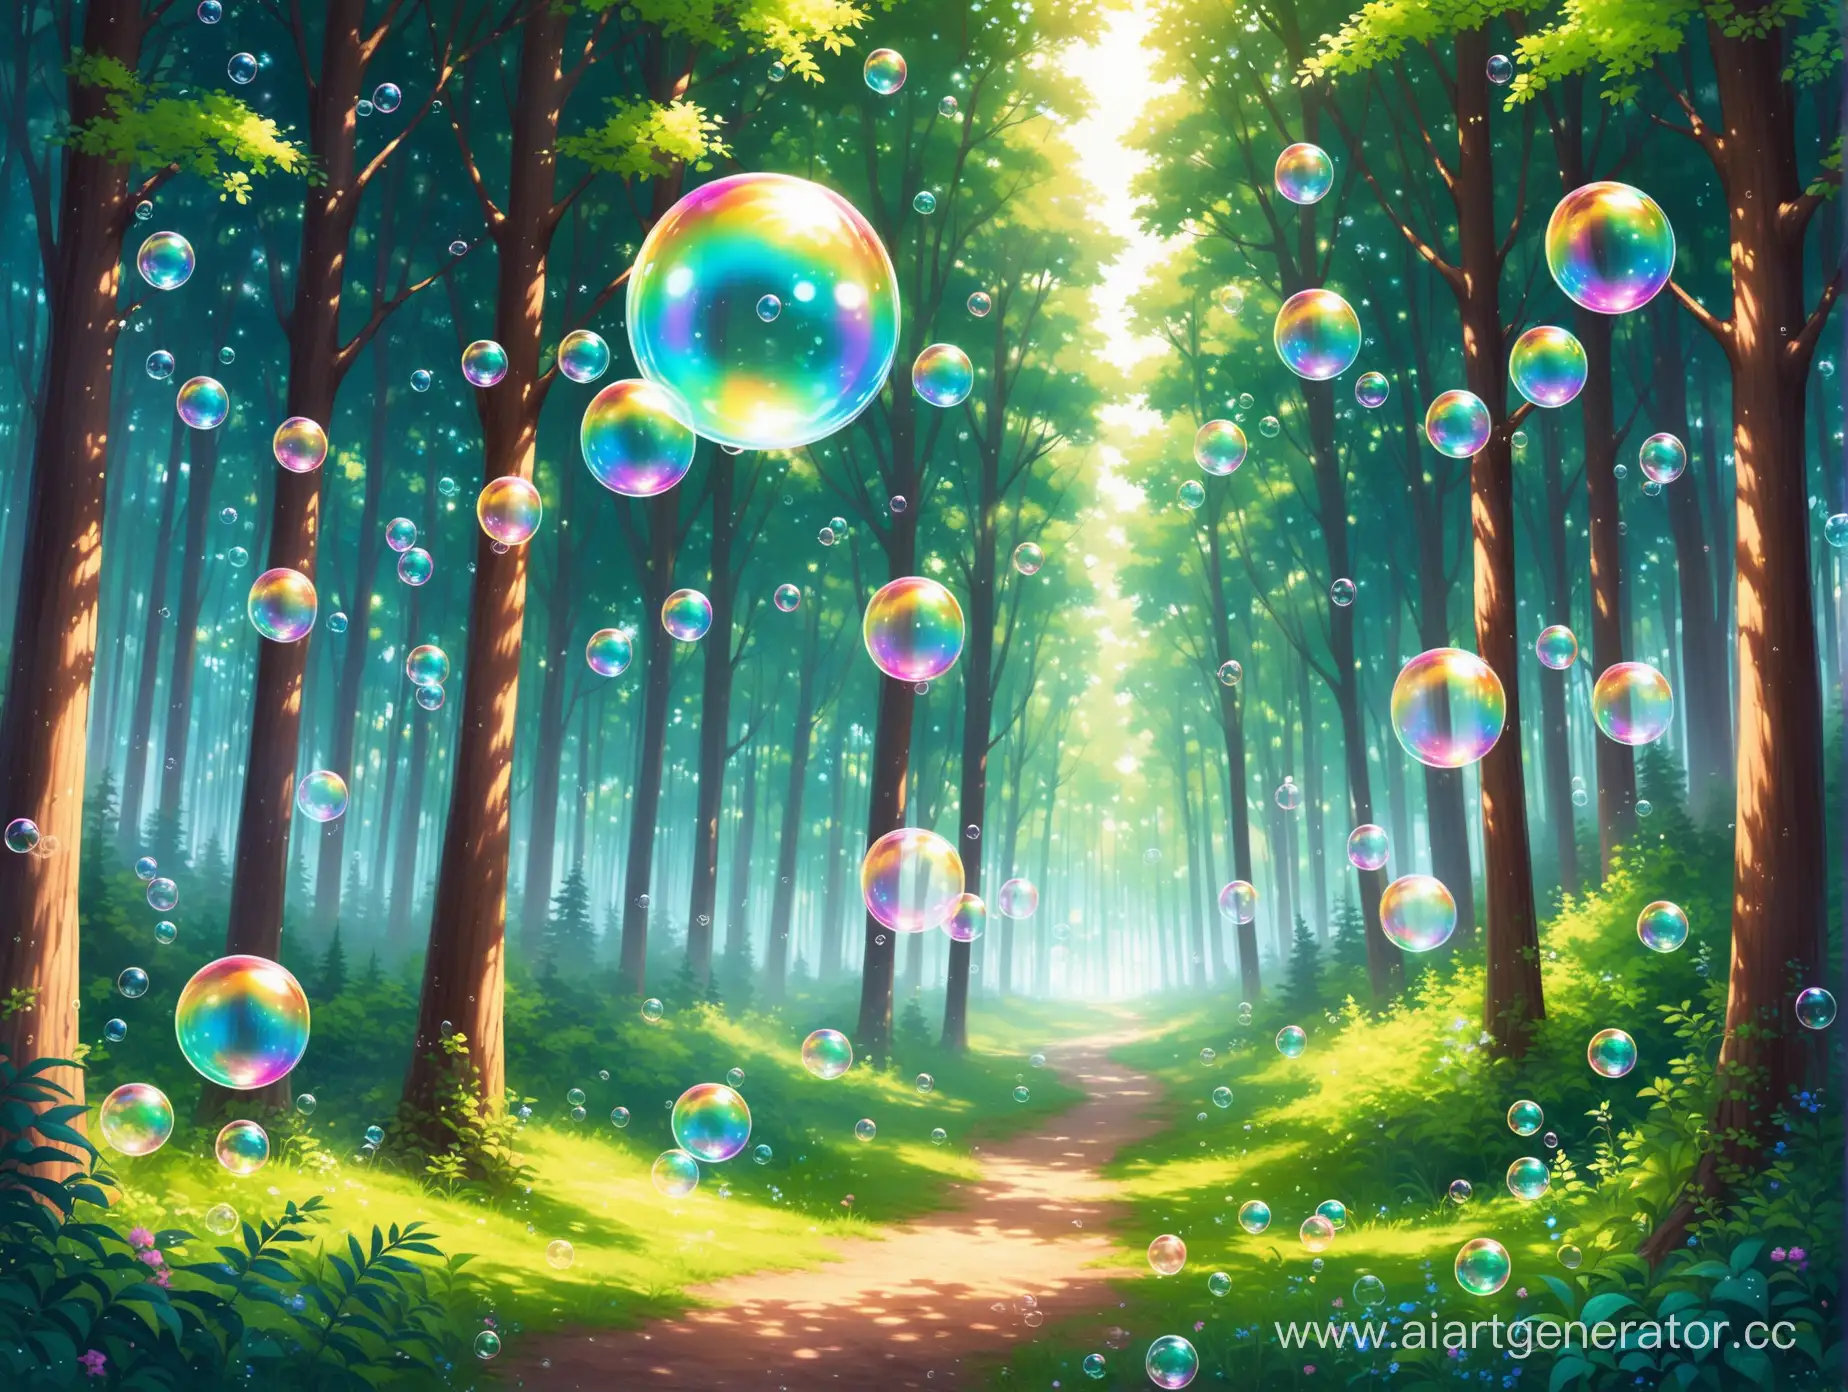 Delightful-Children-Playing-with-Vivid-Soap-Bubbles-Amidst-Lush-Forest